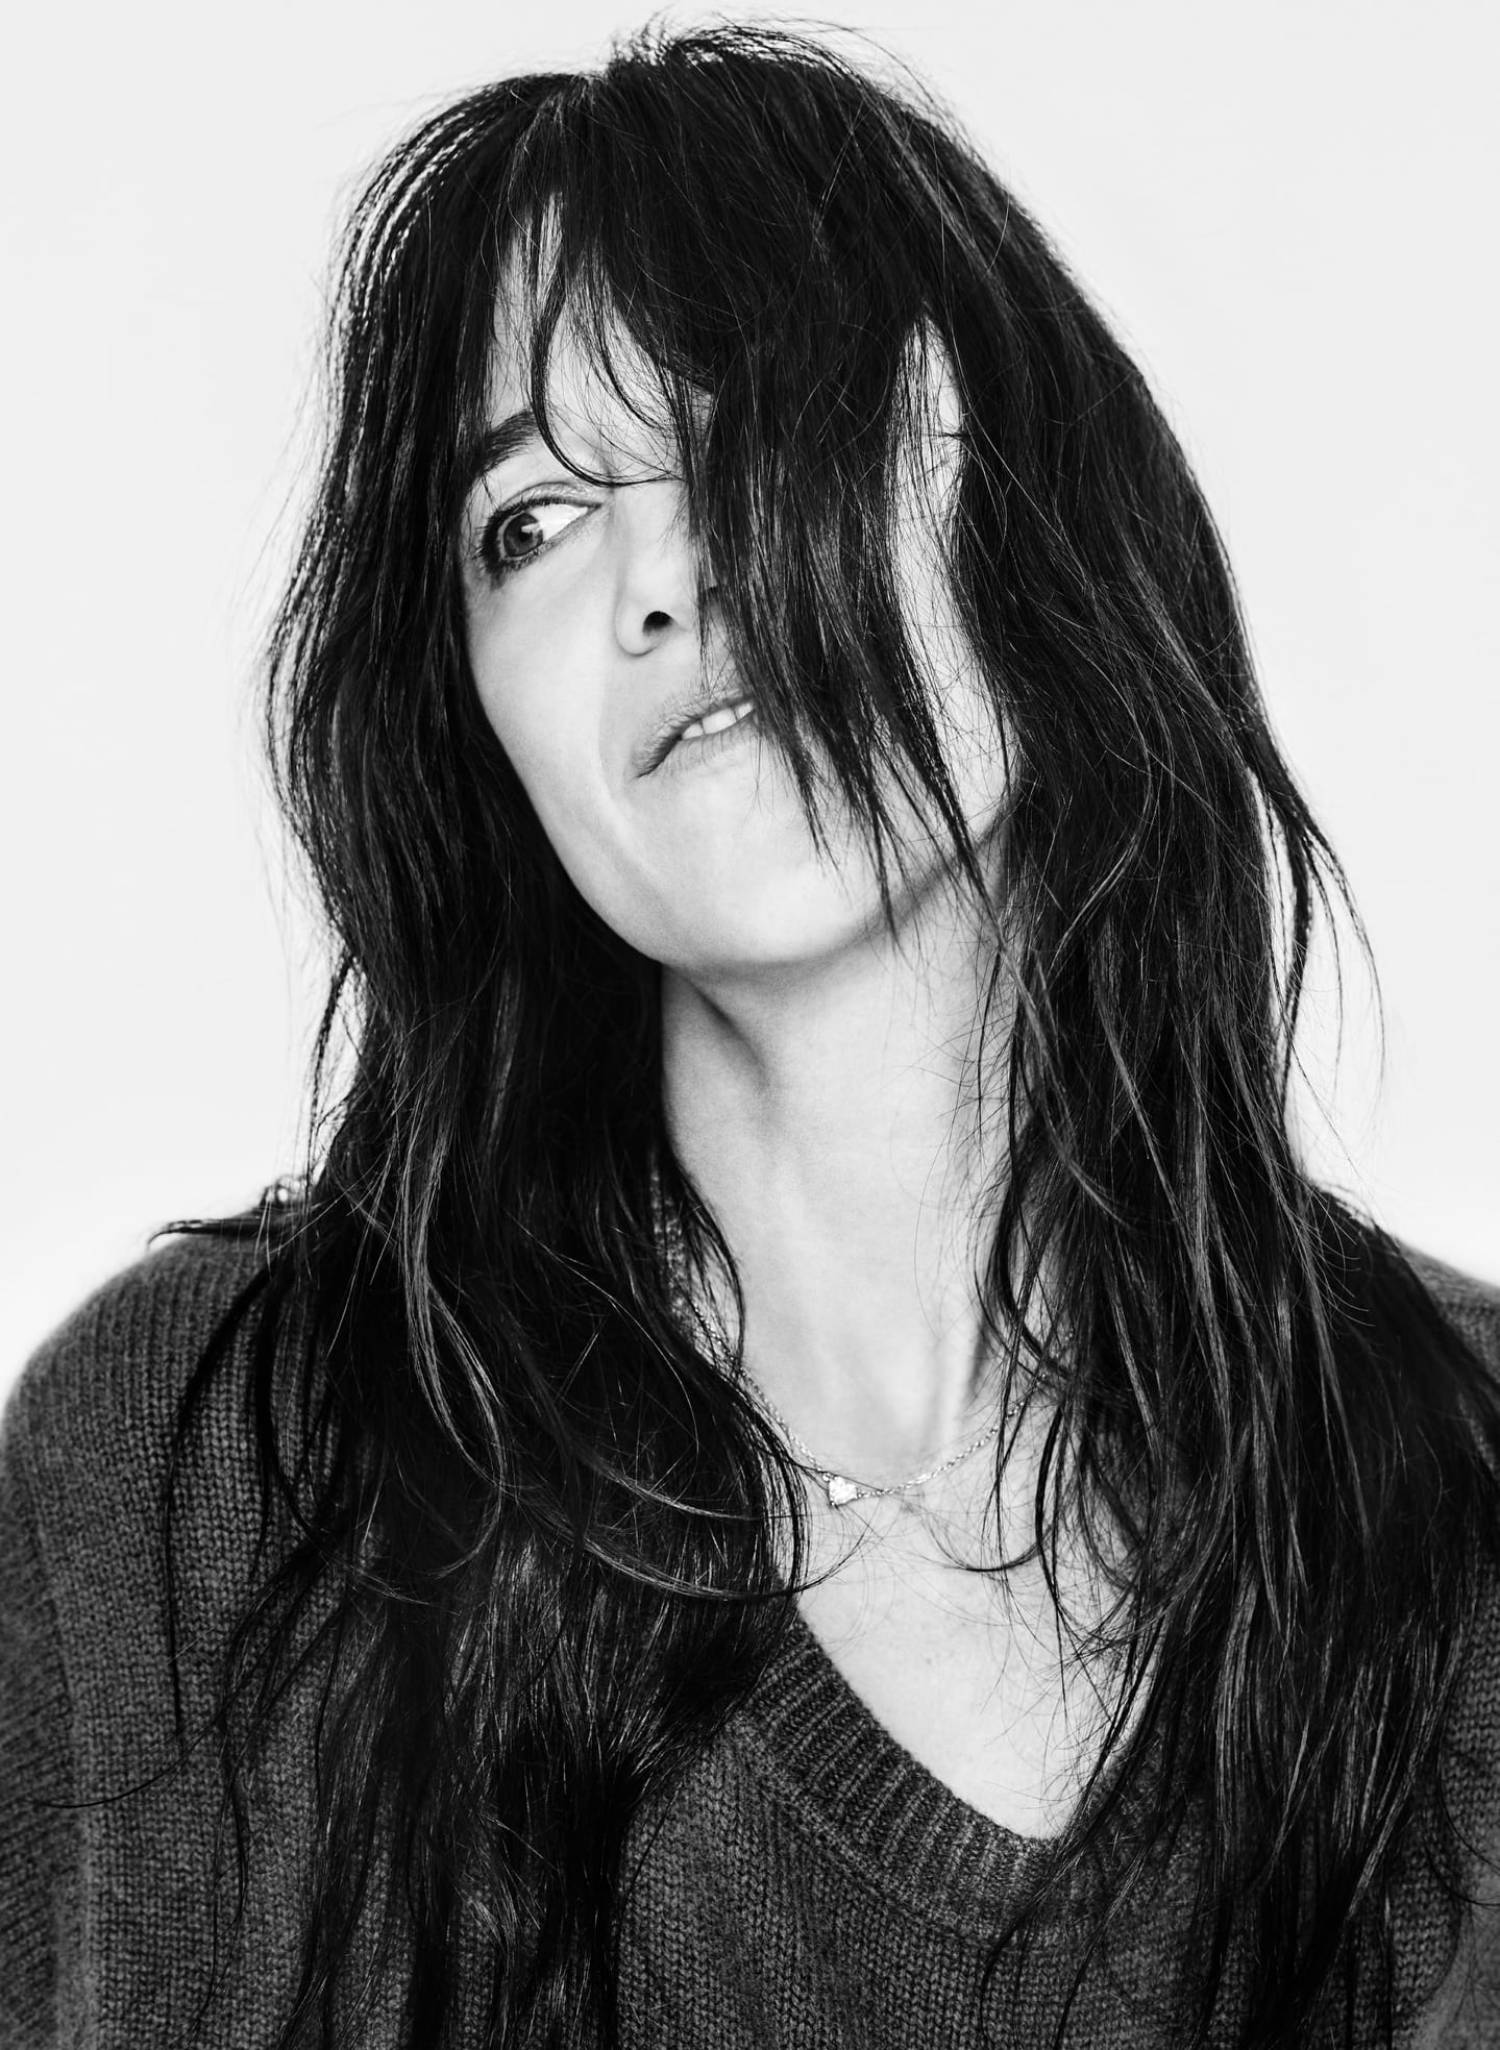 Charlotte Gainsbourg by Collier Schorr for Zara Denim Fall 2021 Ad Campaign